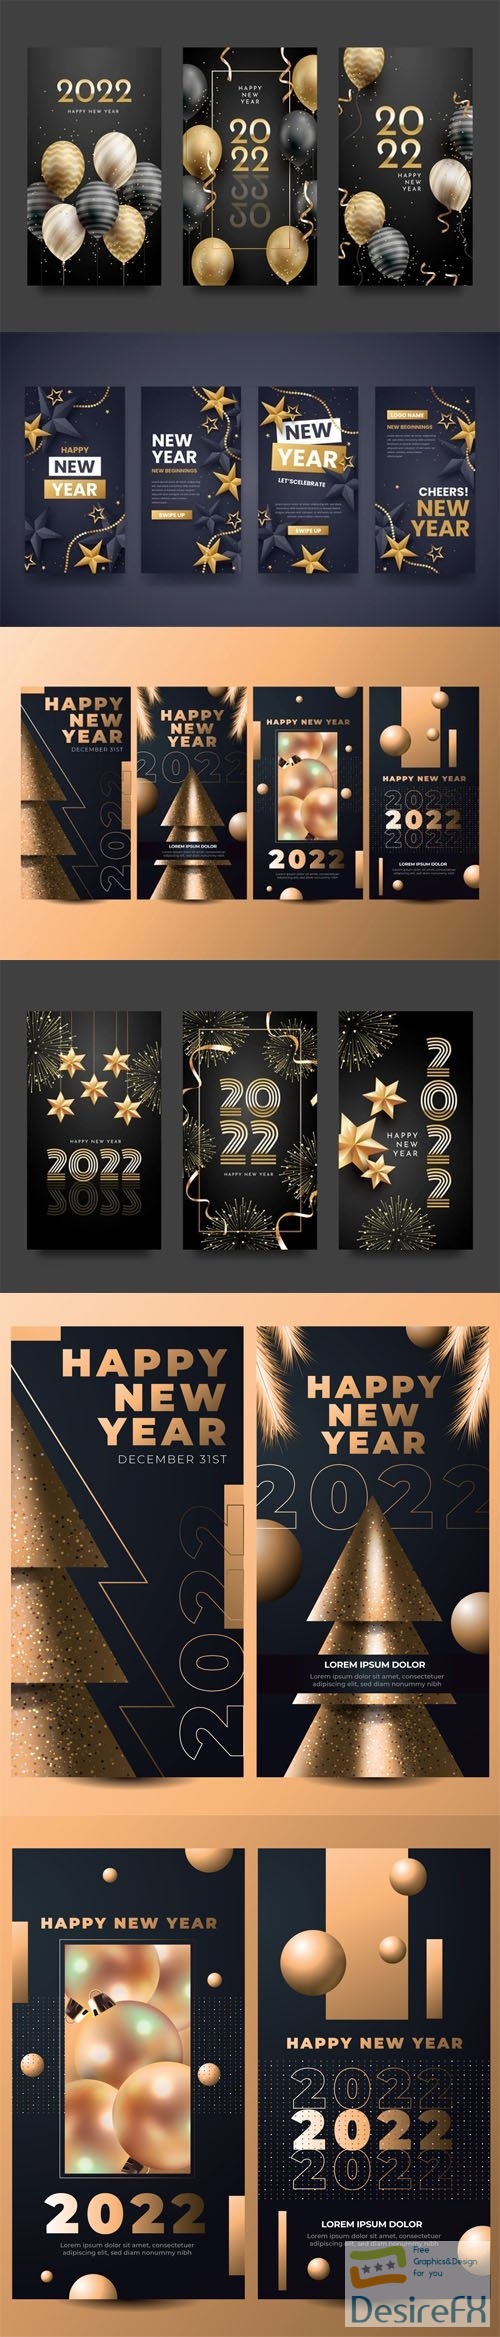 New Year 2022 Instagram Stories Vector Templates Collection